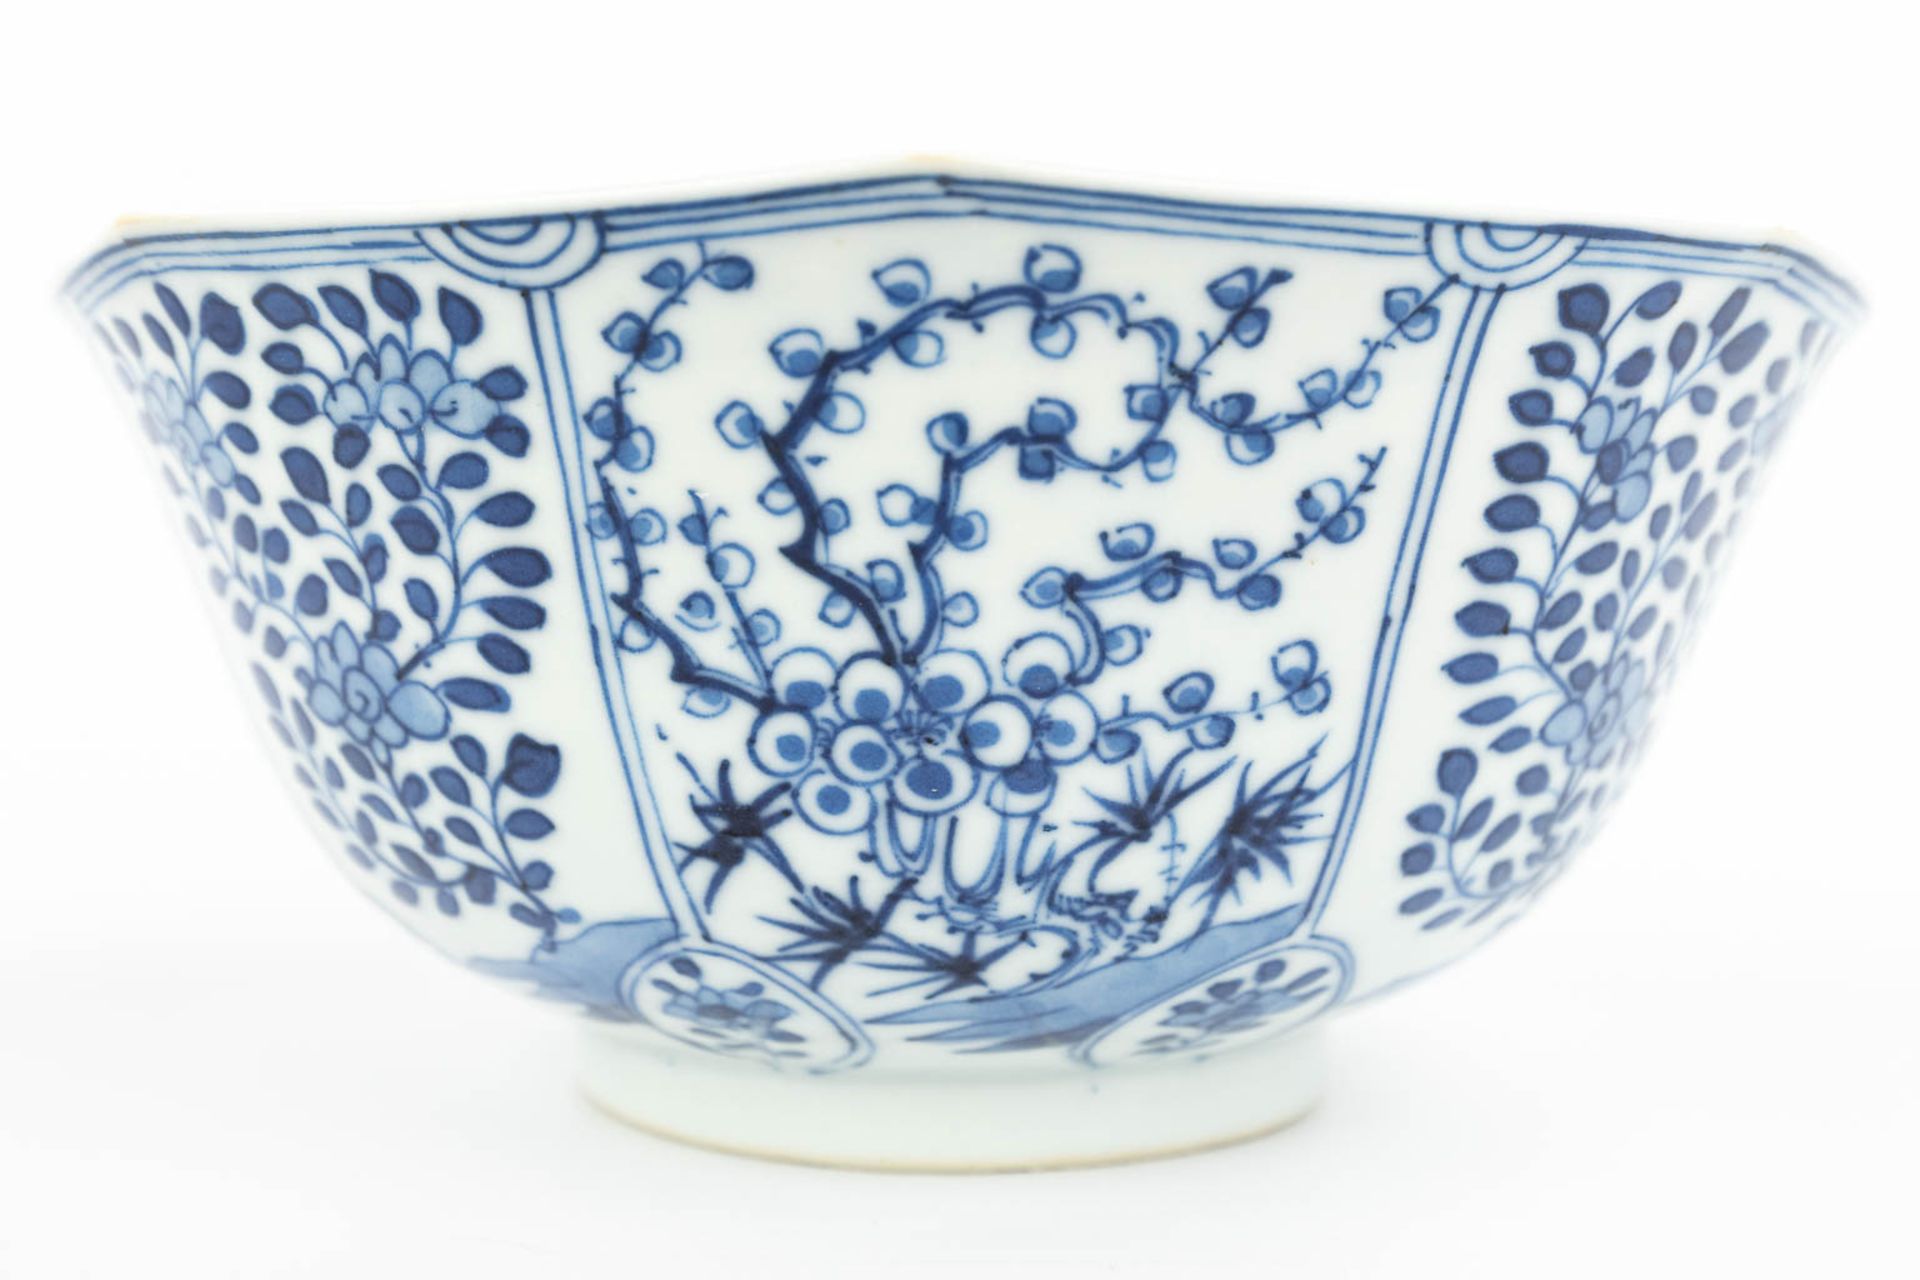 A pair of Chinese bowls made of porcelain with blue-white flower decor and marked Kangxi. (H:7,2cm) - Image 6 of 13